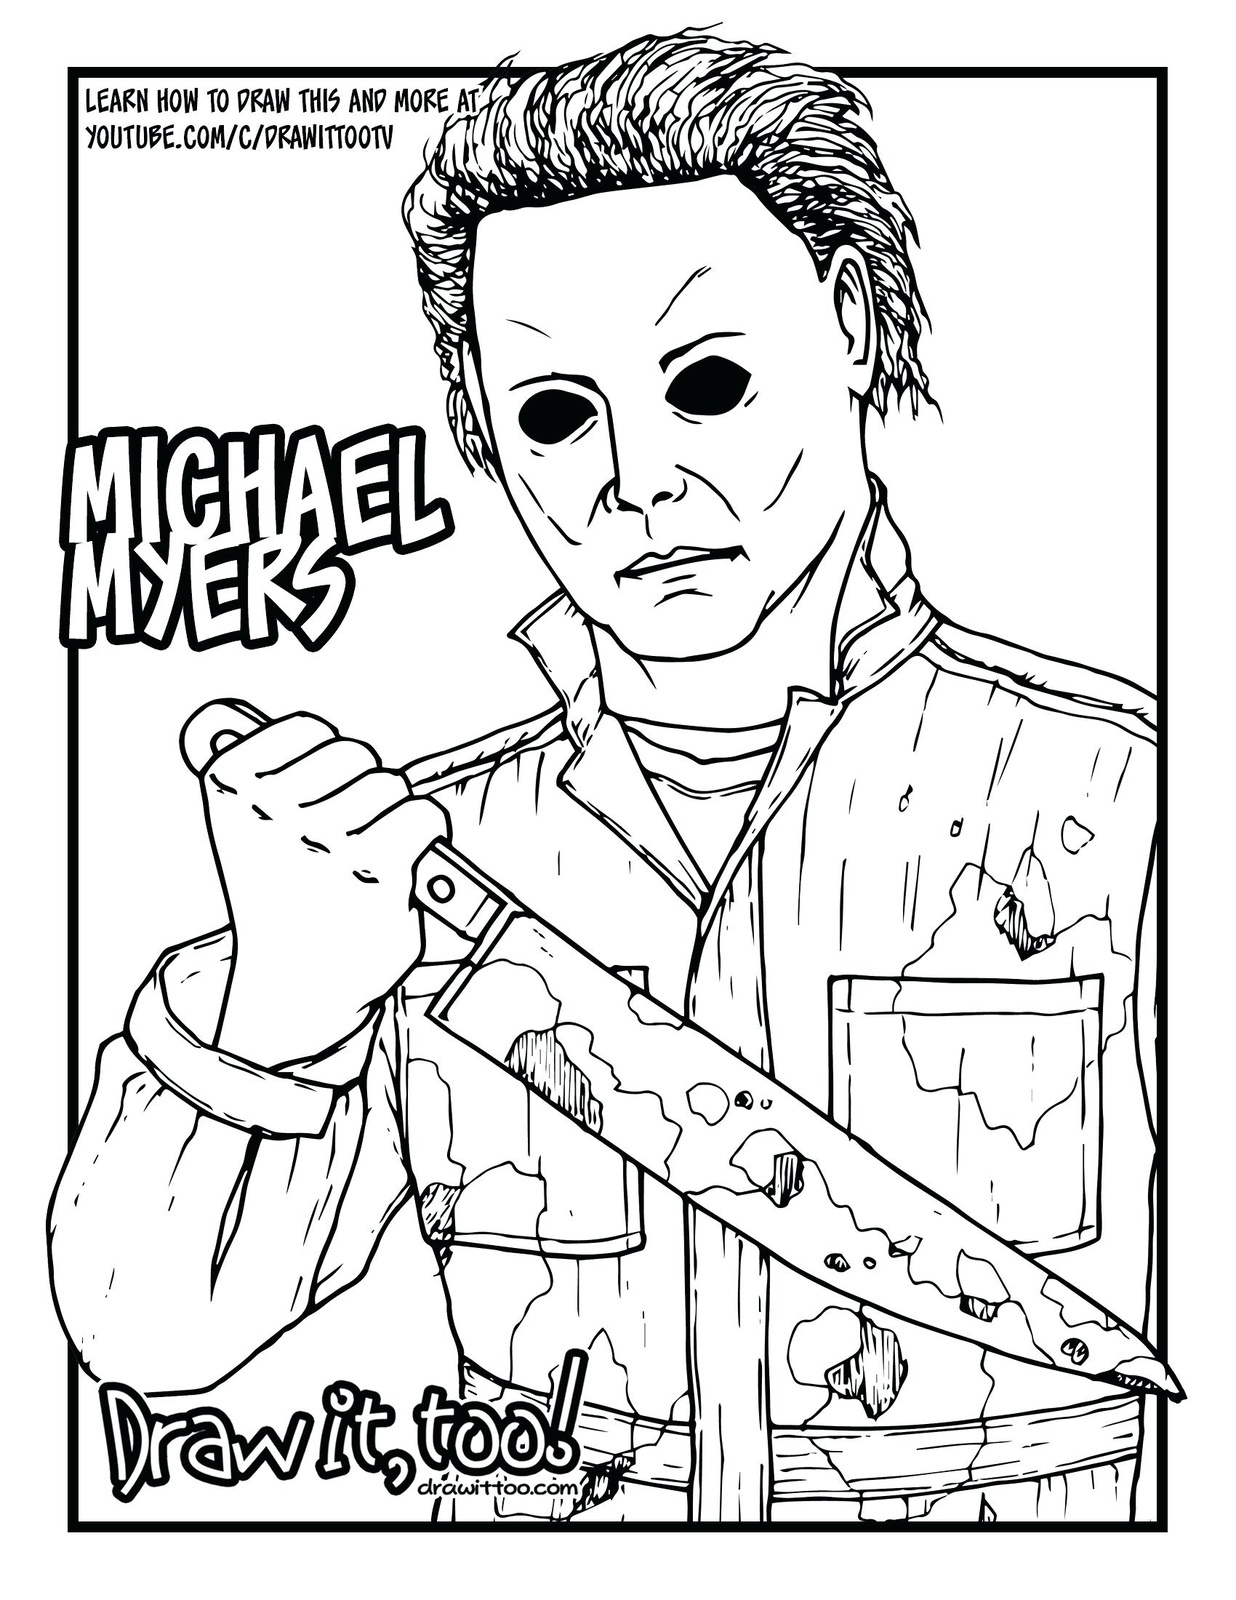 With killers Coloring pages.